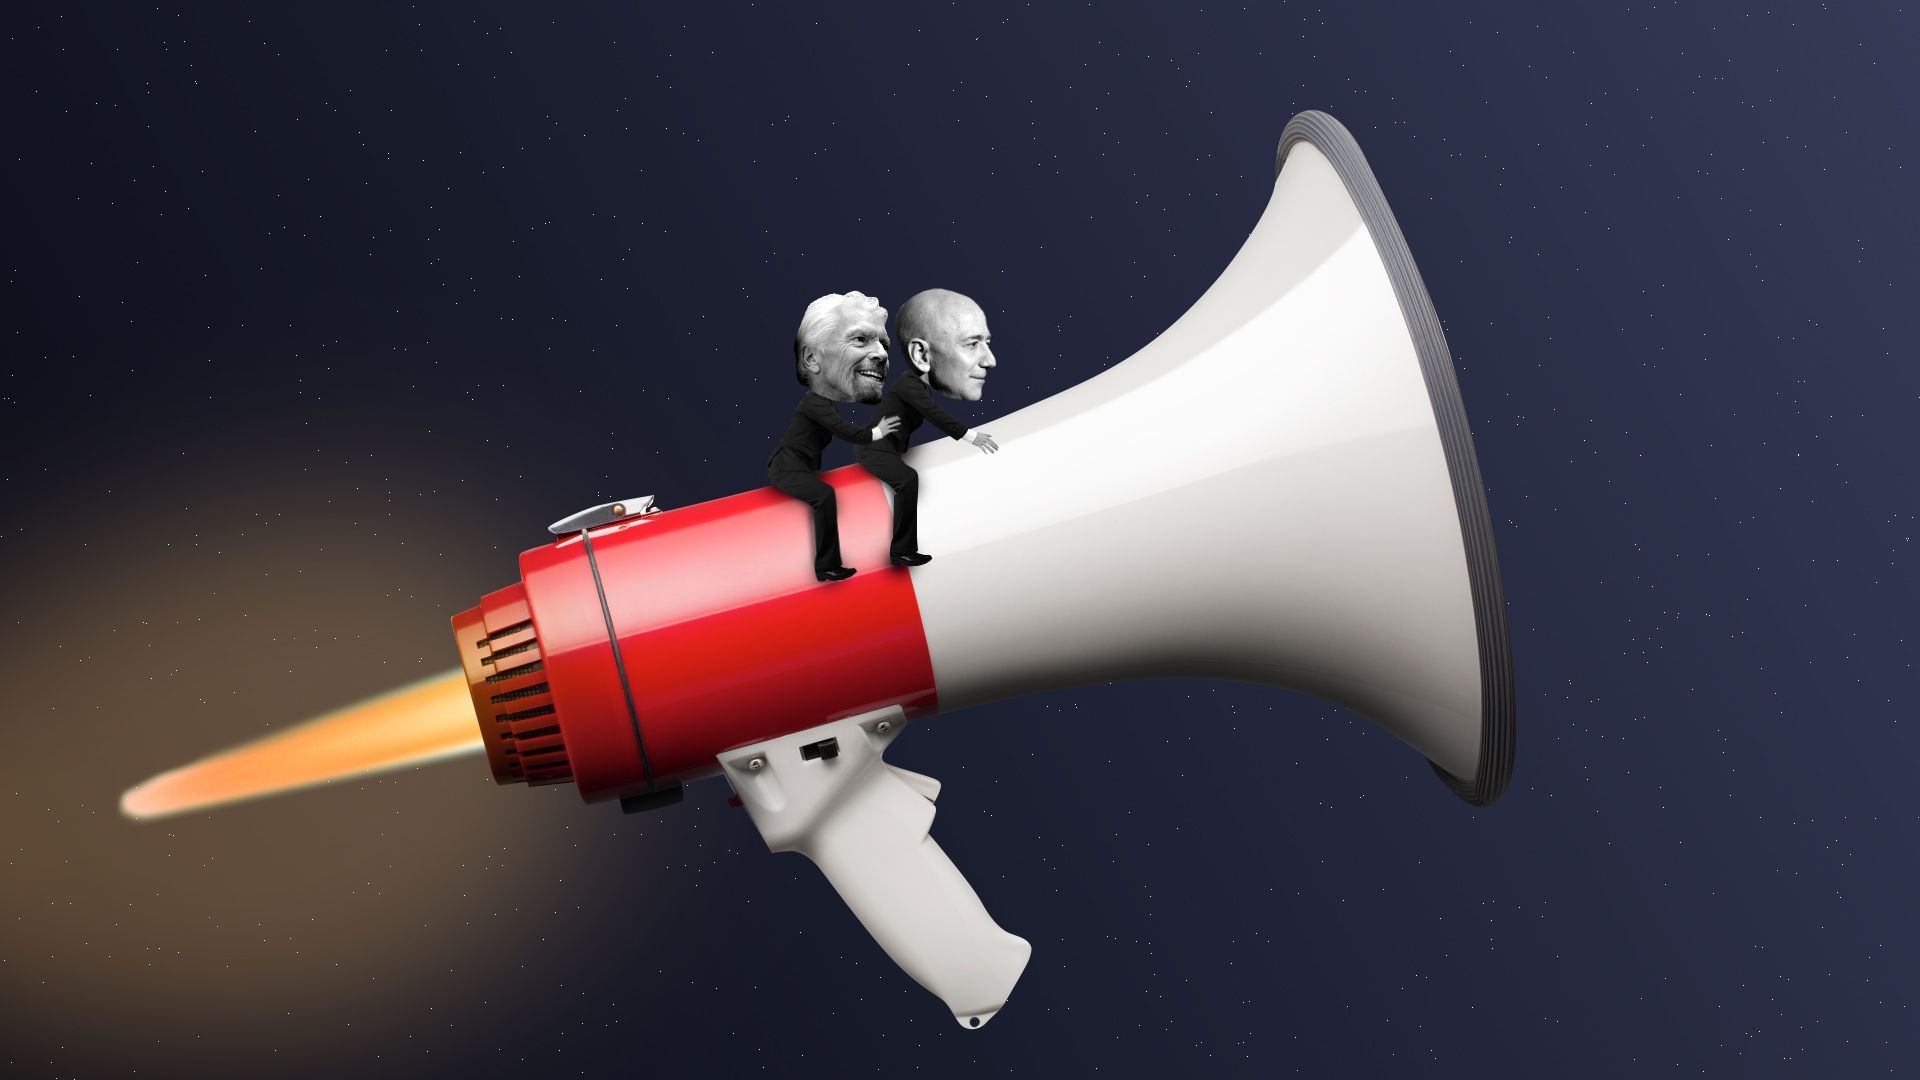 Photo illustration of RIchard Branson and Jeff Bezos riding a bullhorn into space. 